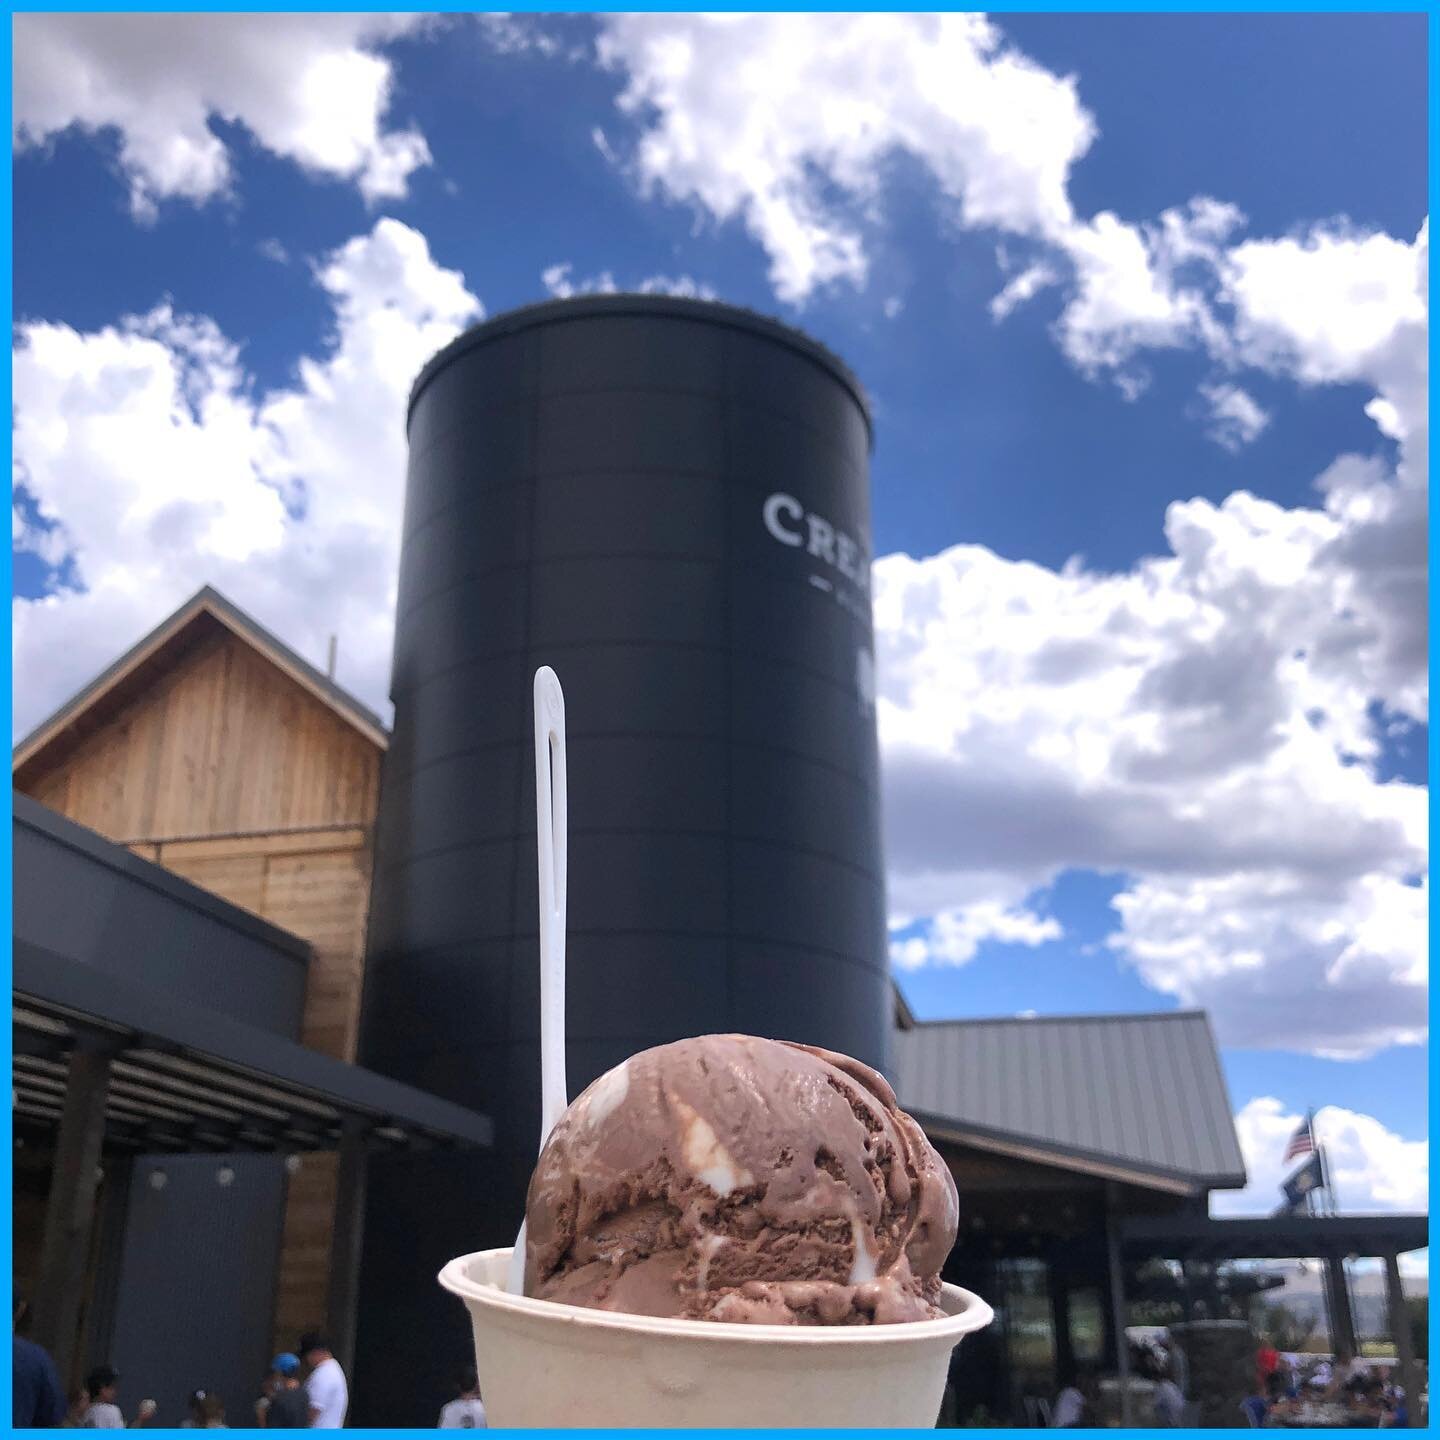 Love finding inspiration on the road! A fresh point of view is sometimes just what is needed. 
☁️ 
🍨 
#thecreamery #utah #beaver #icecream #socialmedia #yosocial #whatareyoupostingfor @thecreameryutah